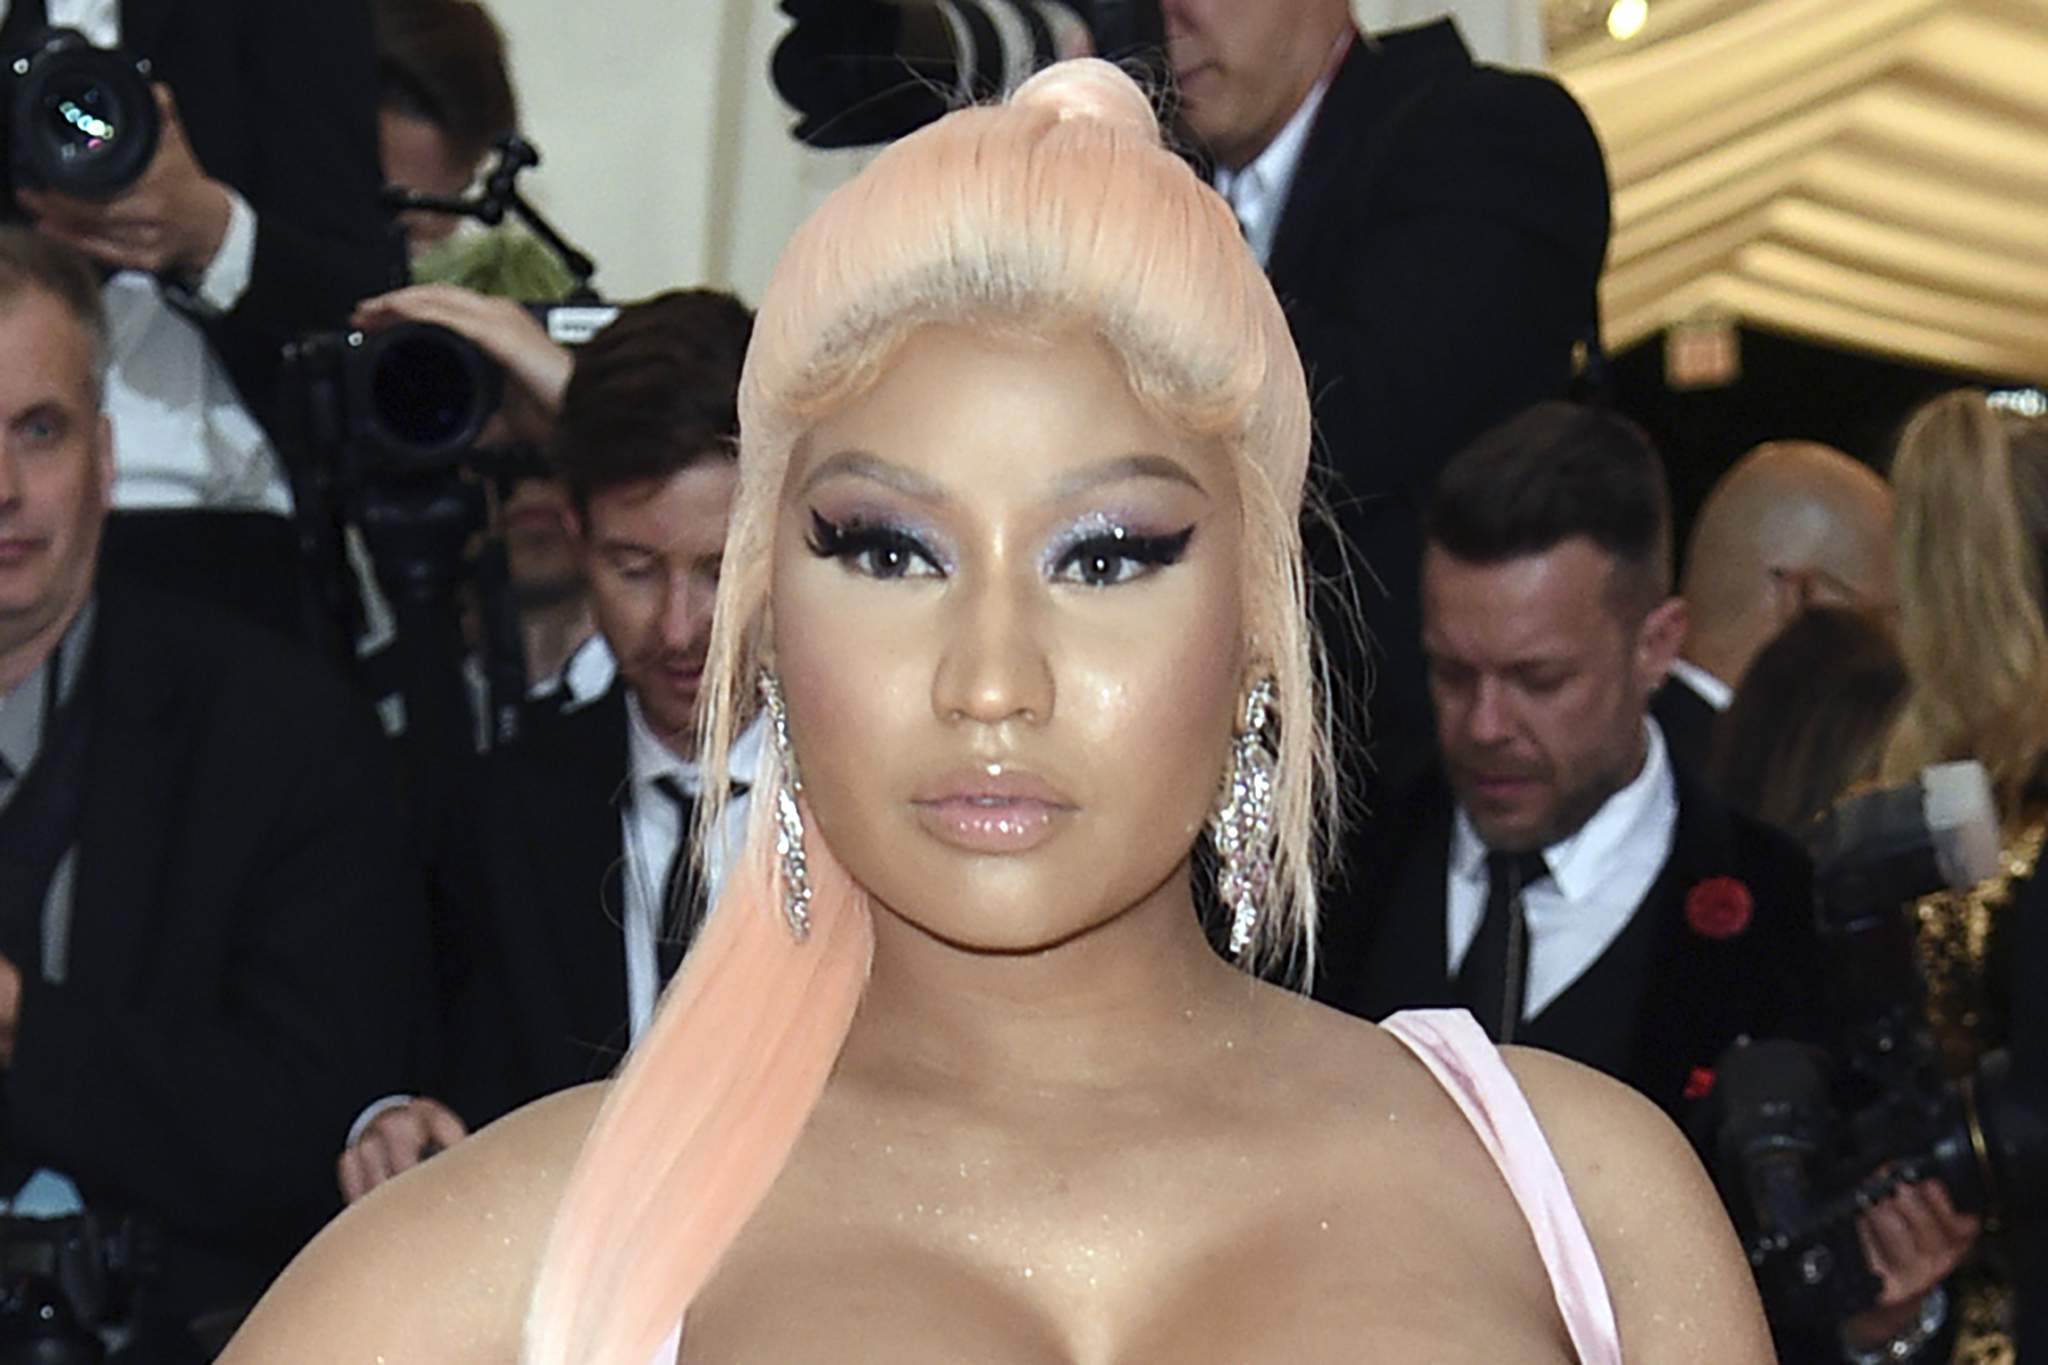 Lawsuit filed over hit-and-run death of Nicki Minaj's father